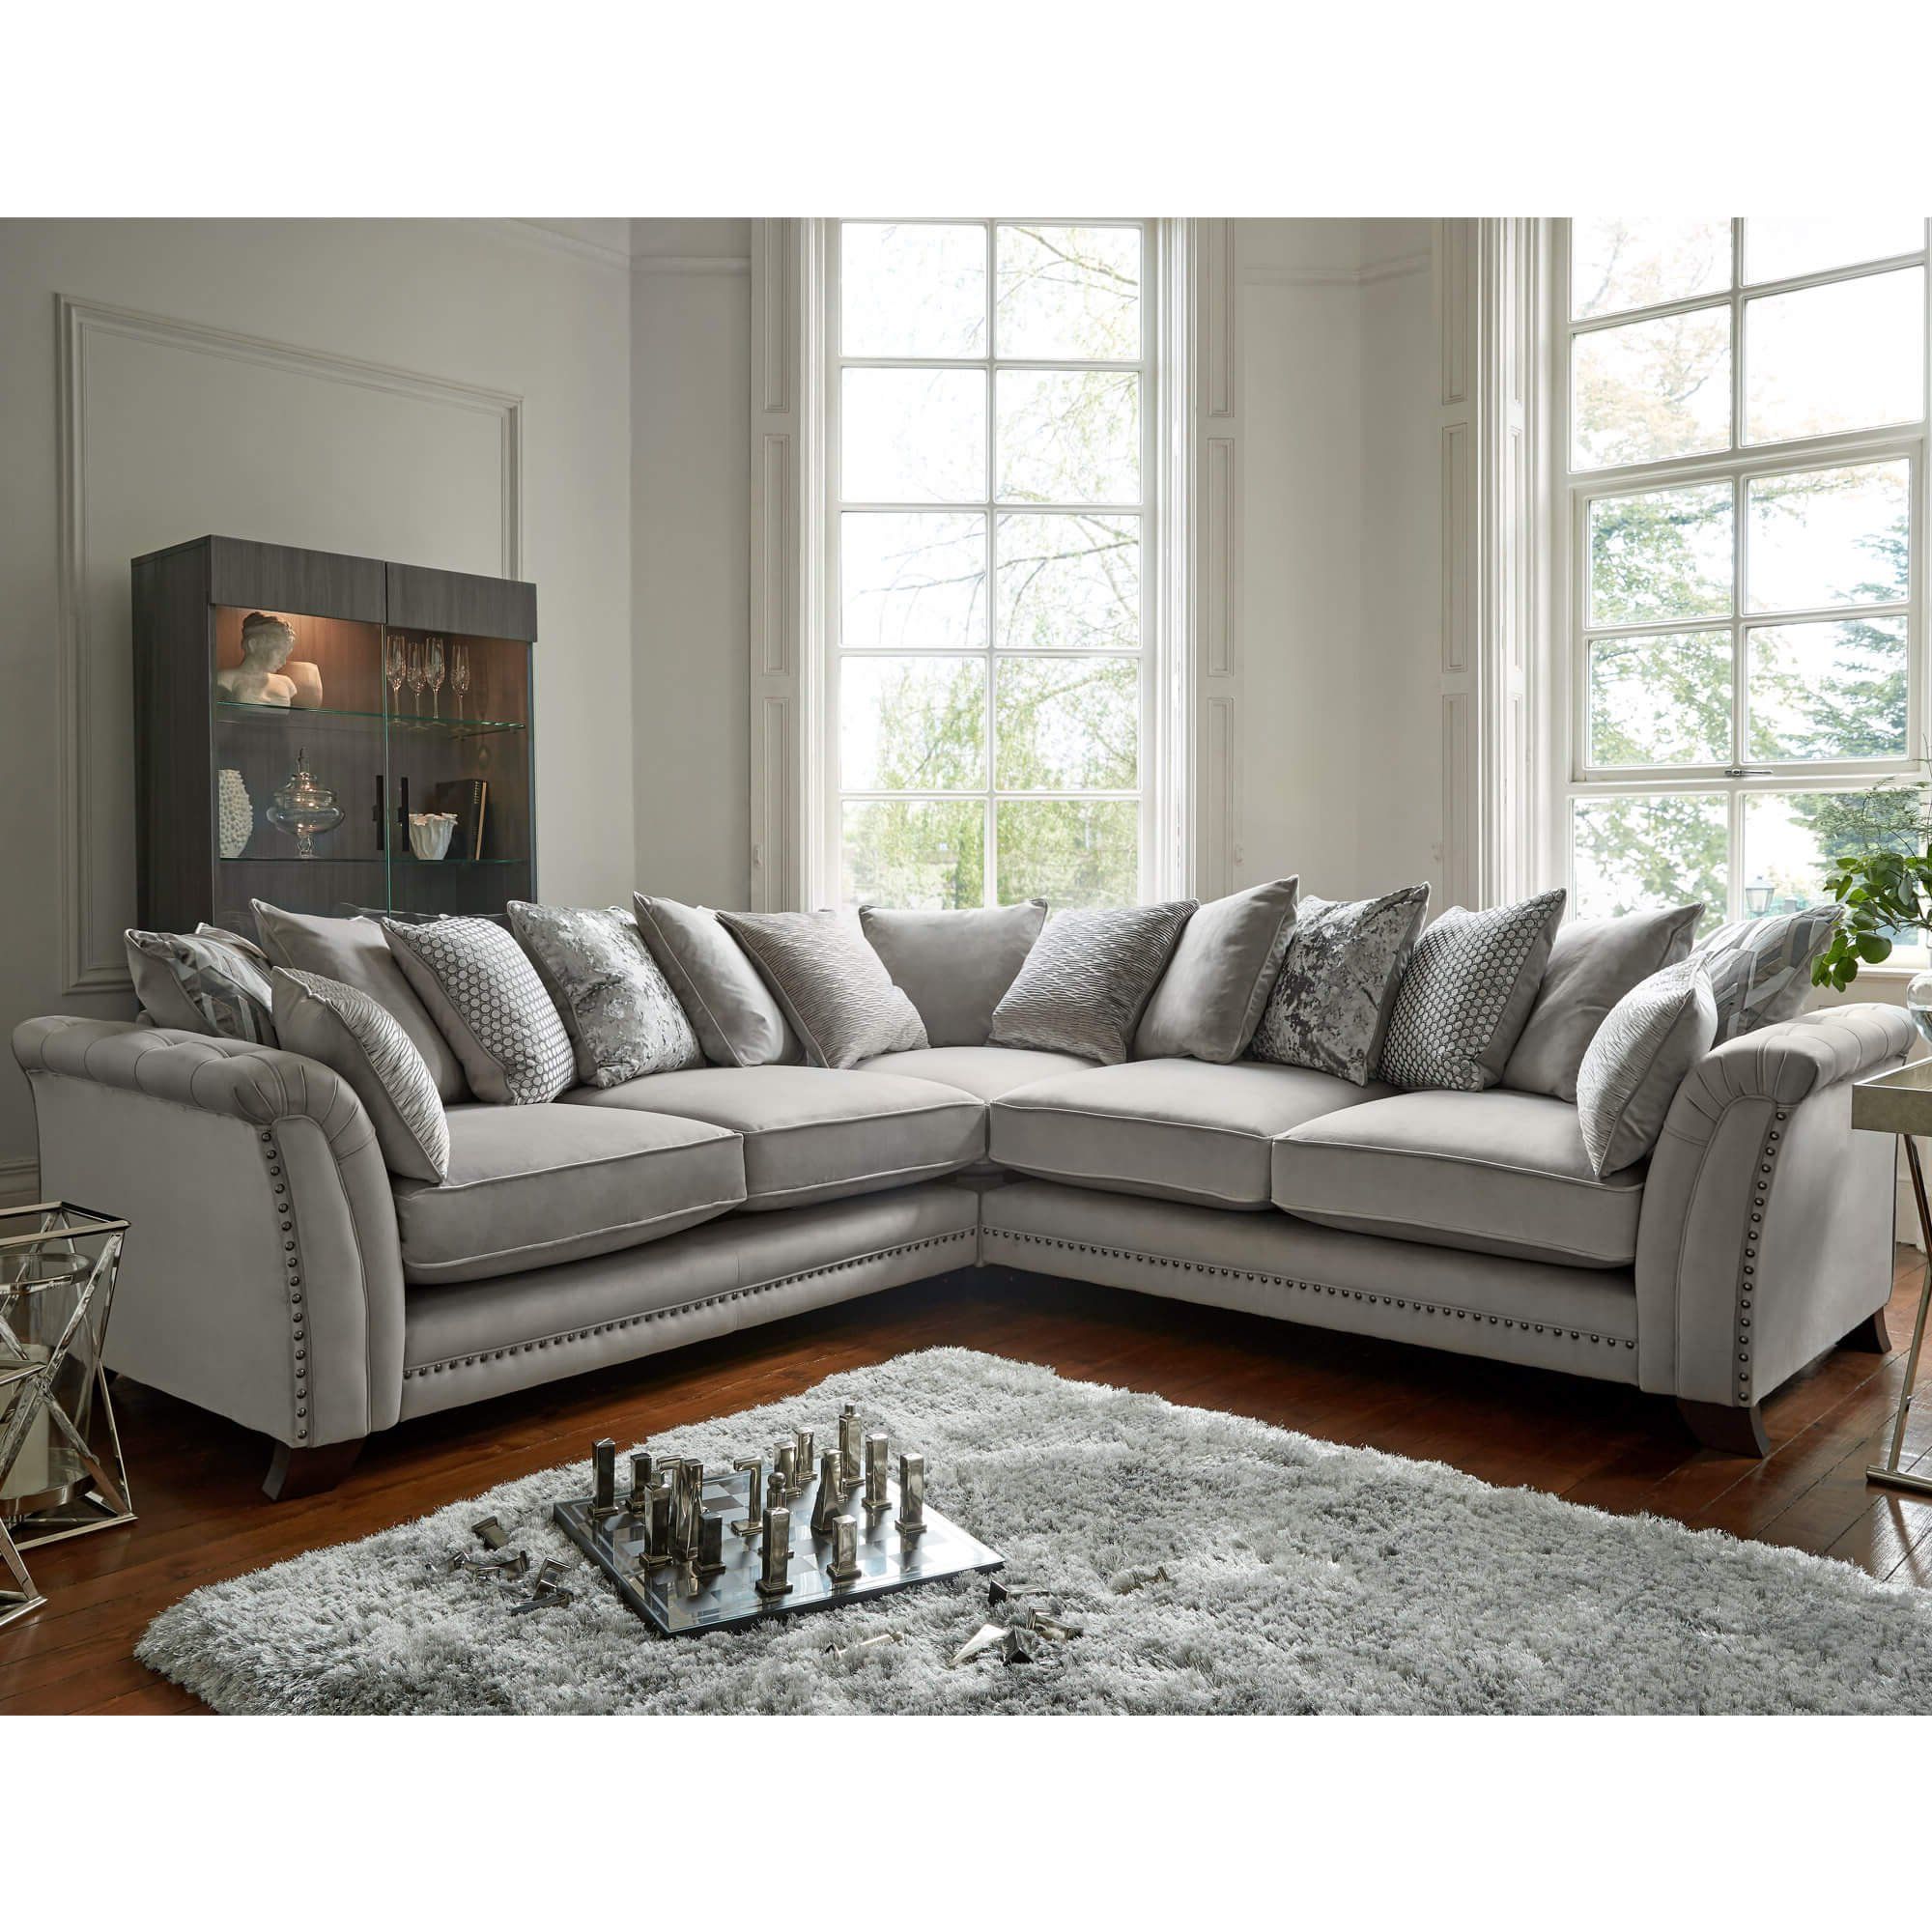 Fairfield Silver Velvet Pillow Back Sofa Collection With Pillowback Sofa Sectionals (Gallery 9 of 20)